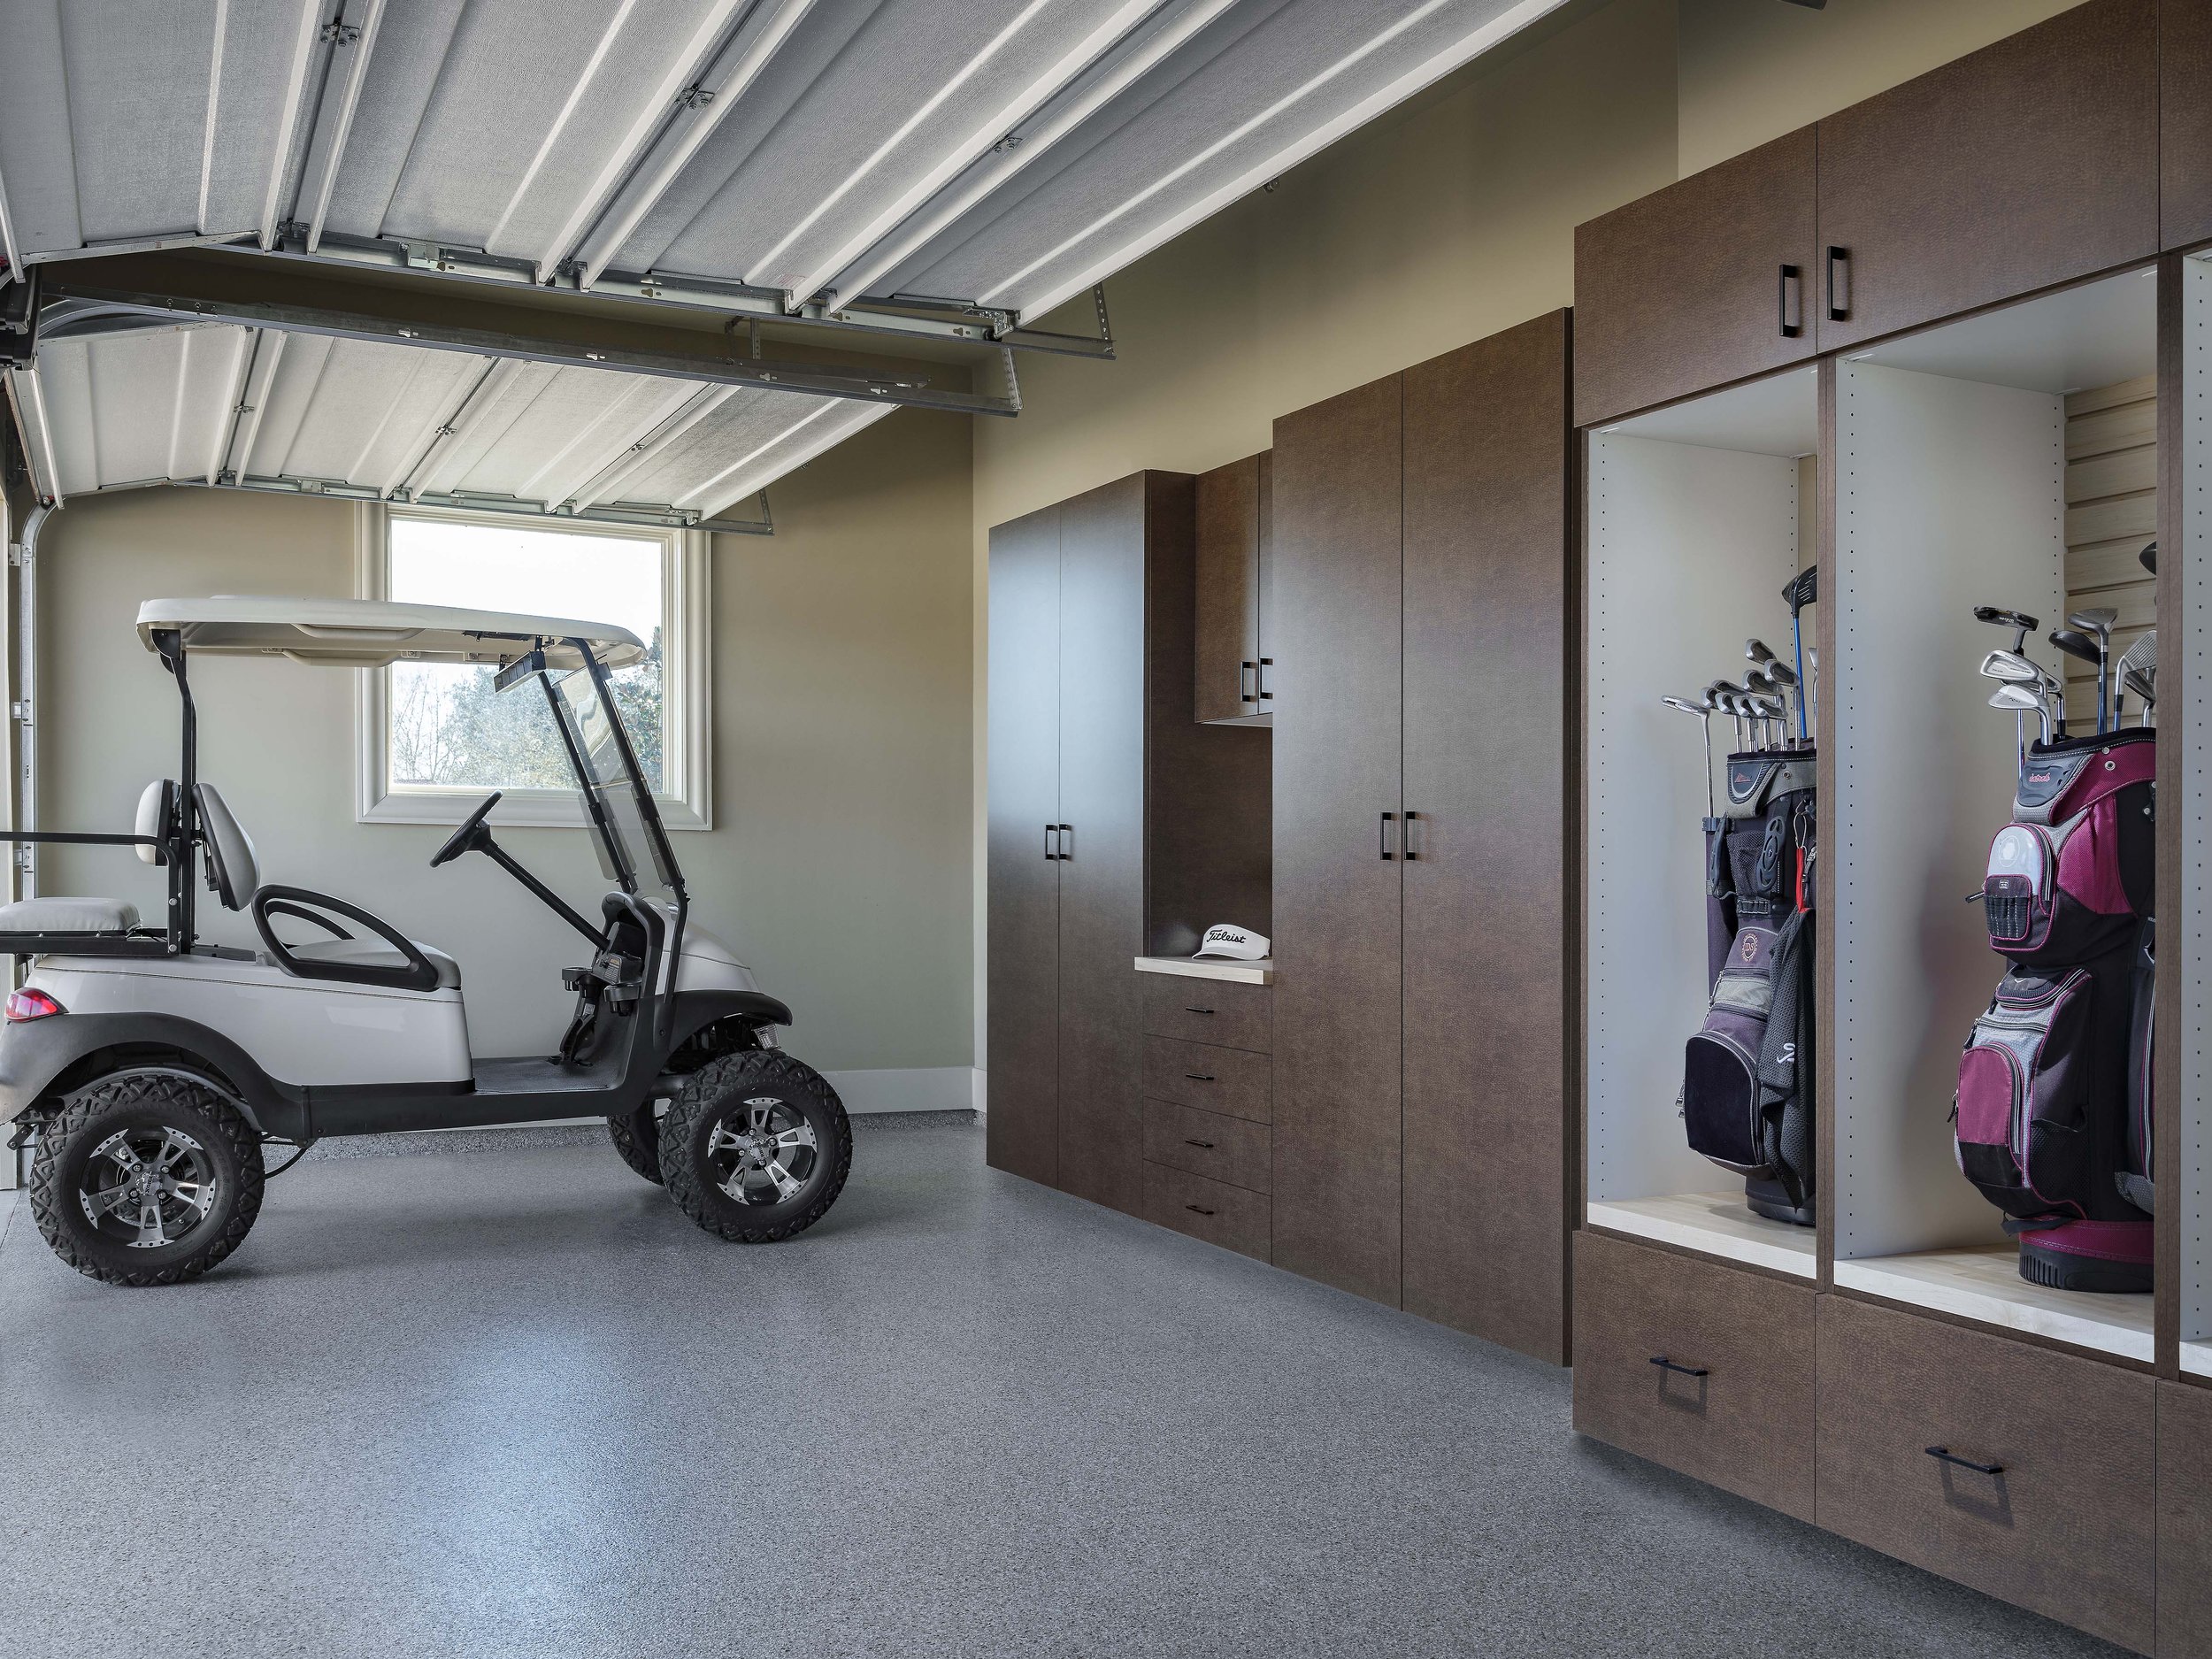   Functional Fitness Spaces   Storage That Supports Your Routine   Free 3-D Design  